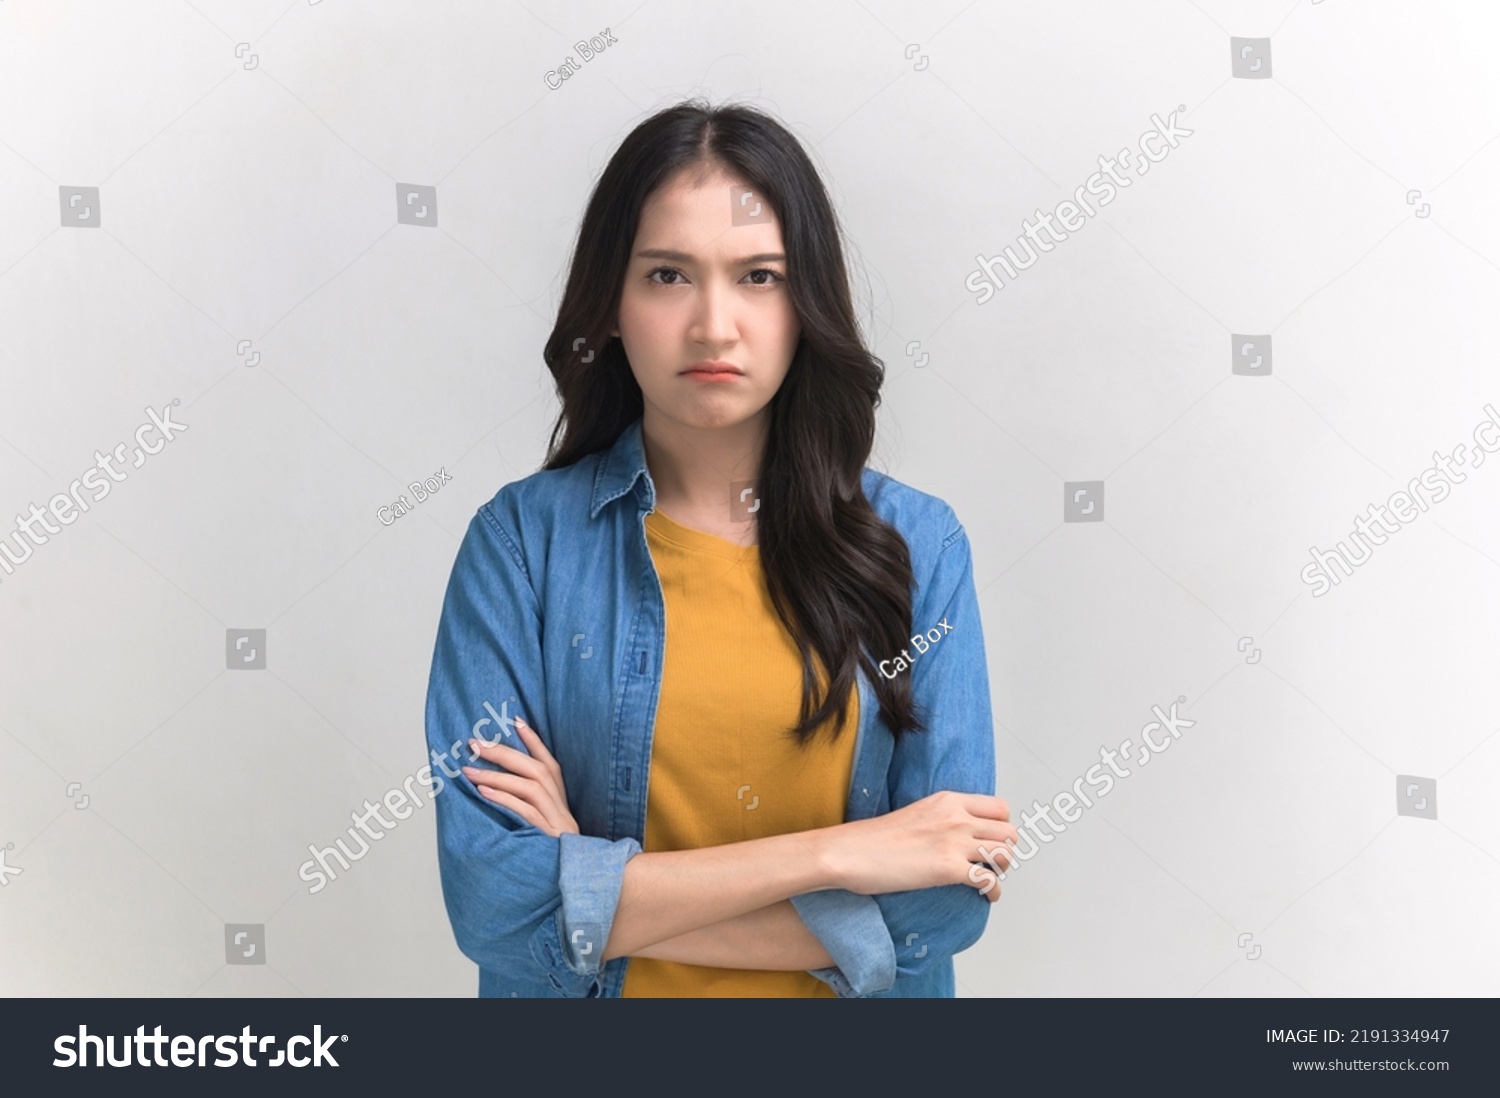 Studio portrait photo of young Asian woman with anger face expression on white background. Young woman emotion face expression portrait concept. #2191334947